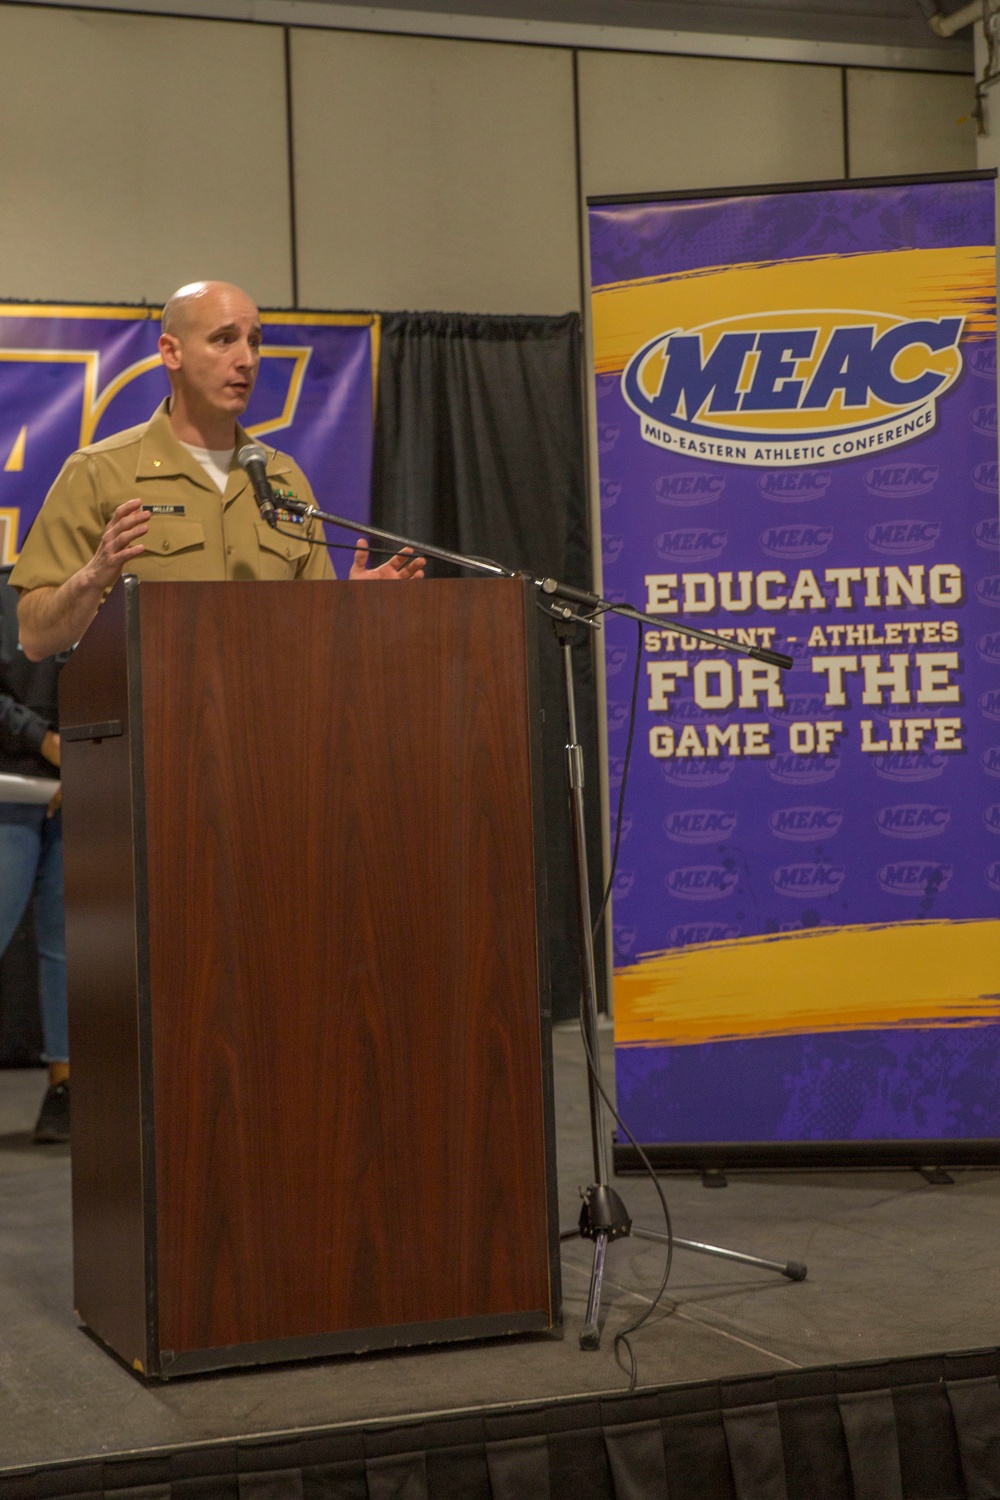 Marines interact with students at MEAC college fair